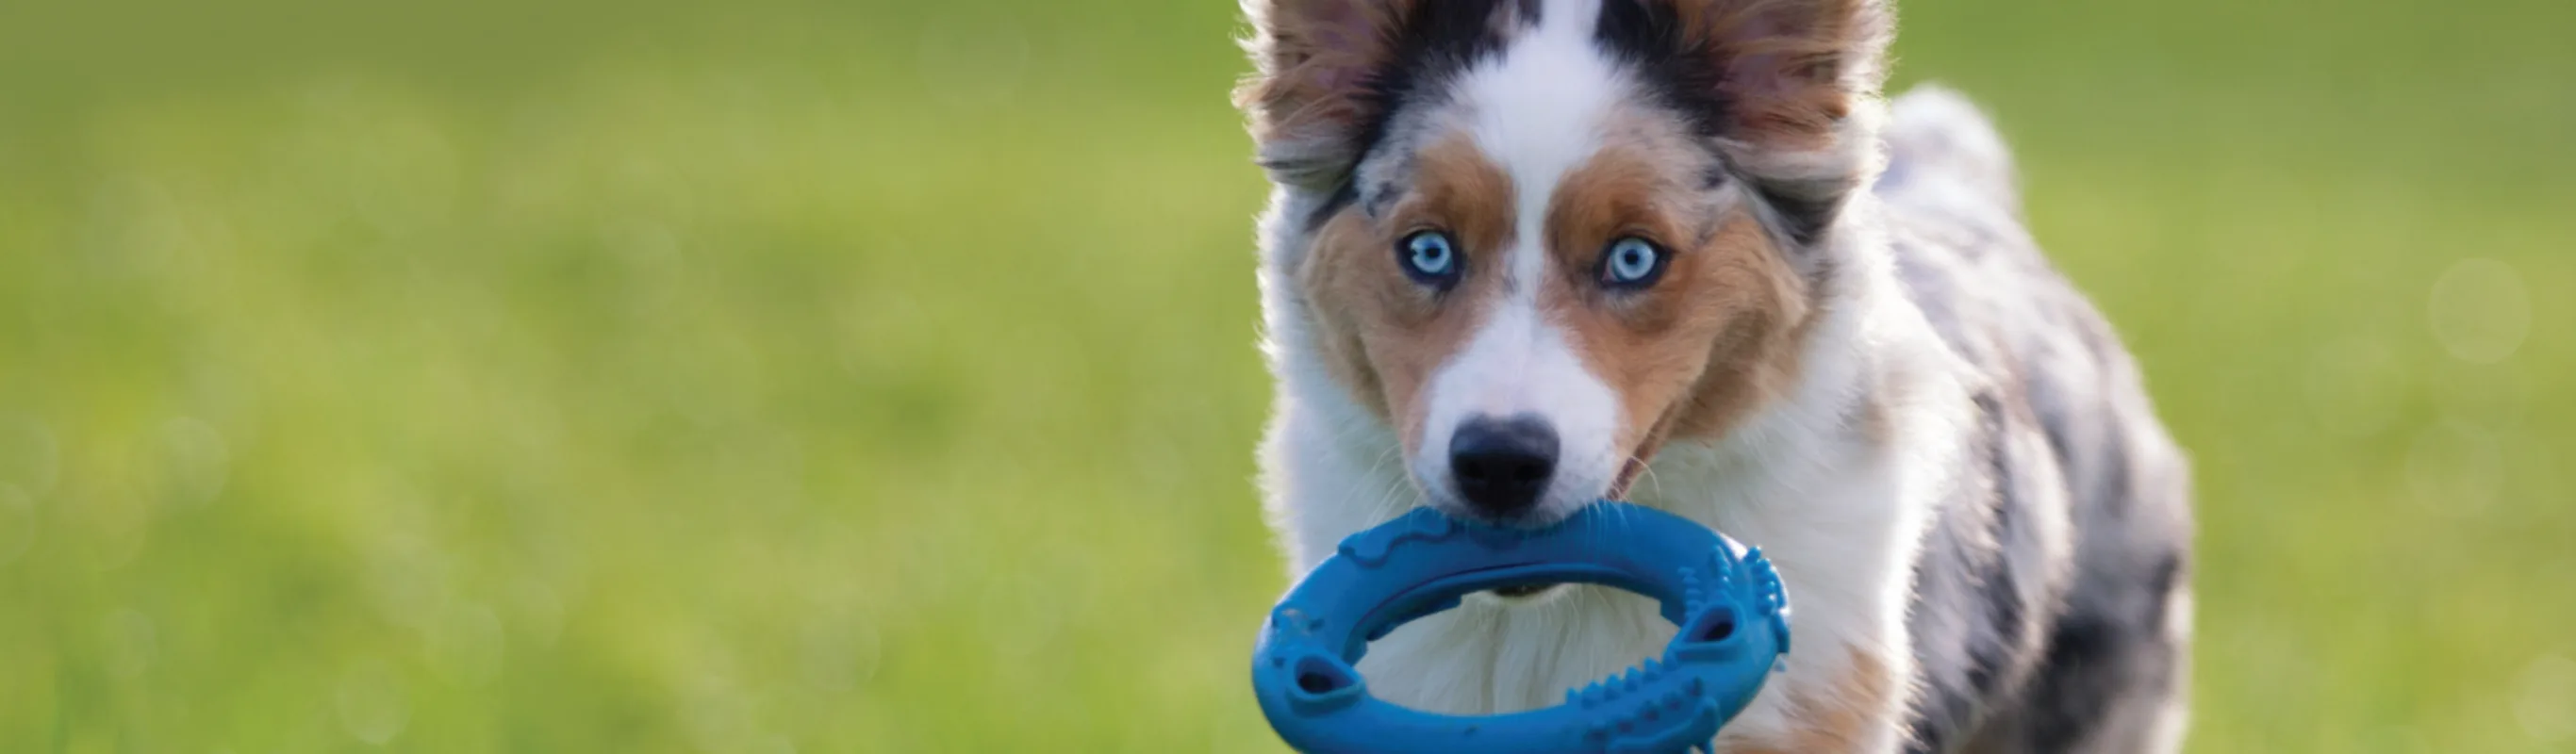 Dog with bright blue eyes and a blue toy in its mouth. 